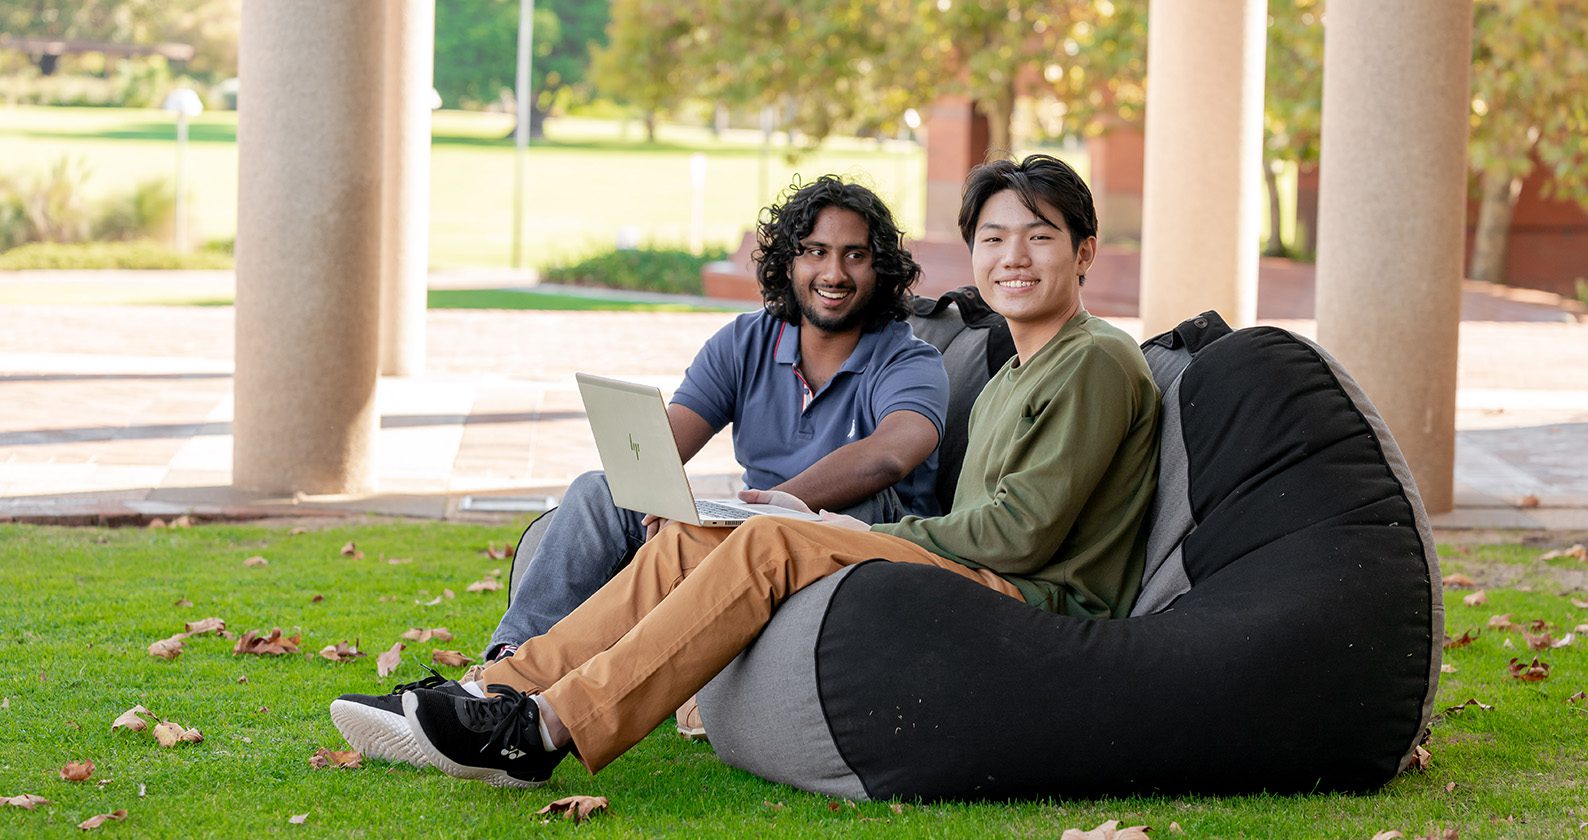 Two students from culturally diverse backgrounds sit together with a laptop